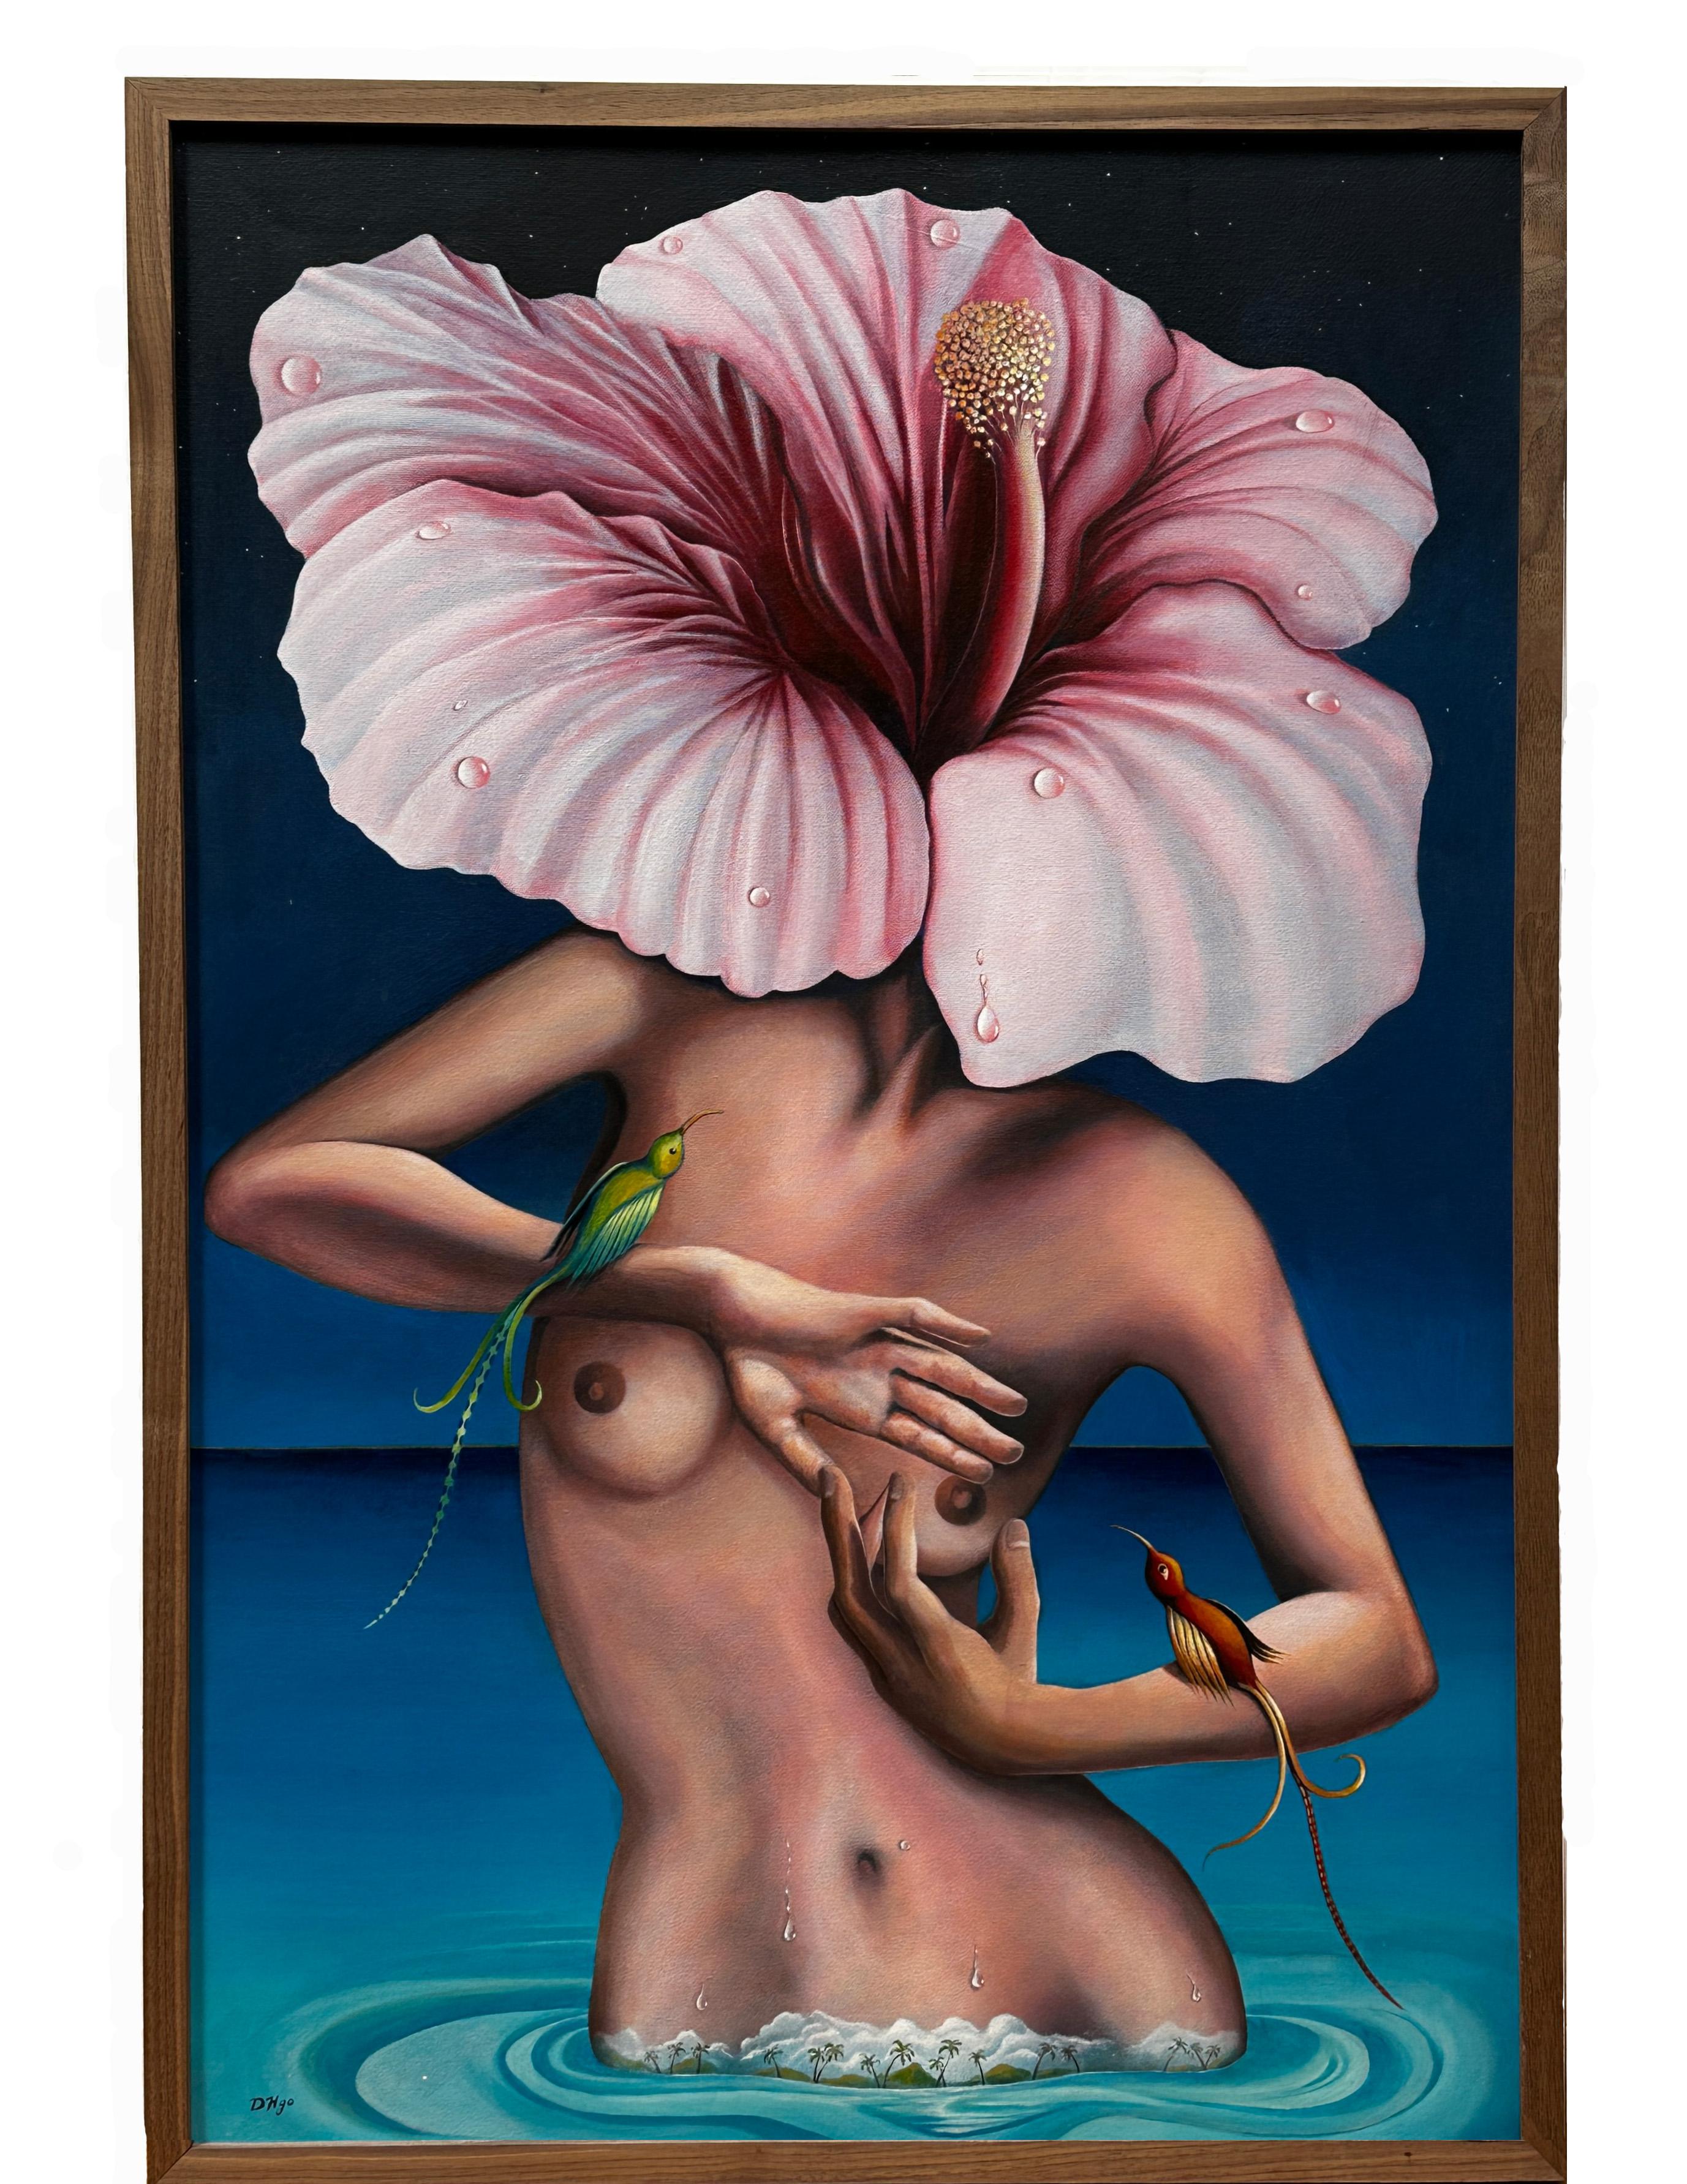 This acrylic painting on canvas, titled “The Myth of Hula” by Dane Hidalgo and dated 2003, is a
captivating visual representation of Hawaiian life and myths depicting a woman emerging from
the Ocean and becoming a flower.
The sky is spangled with